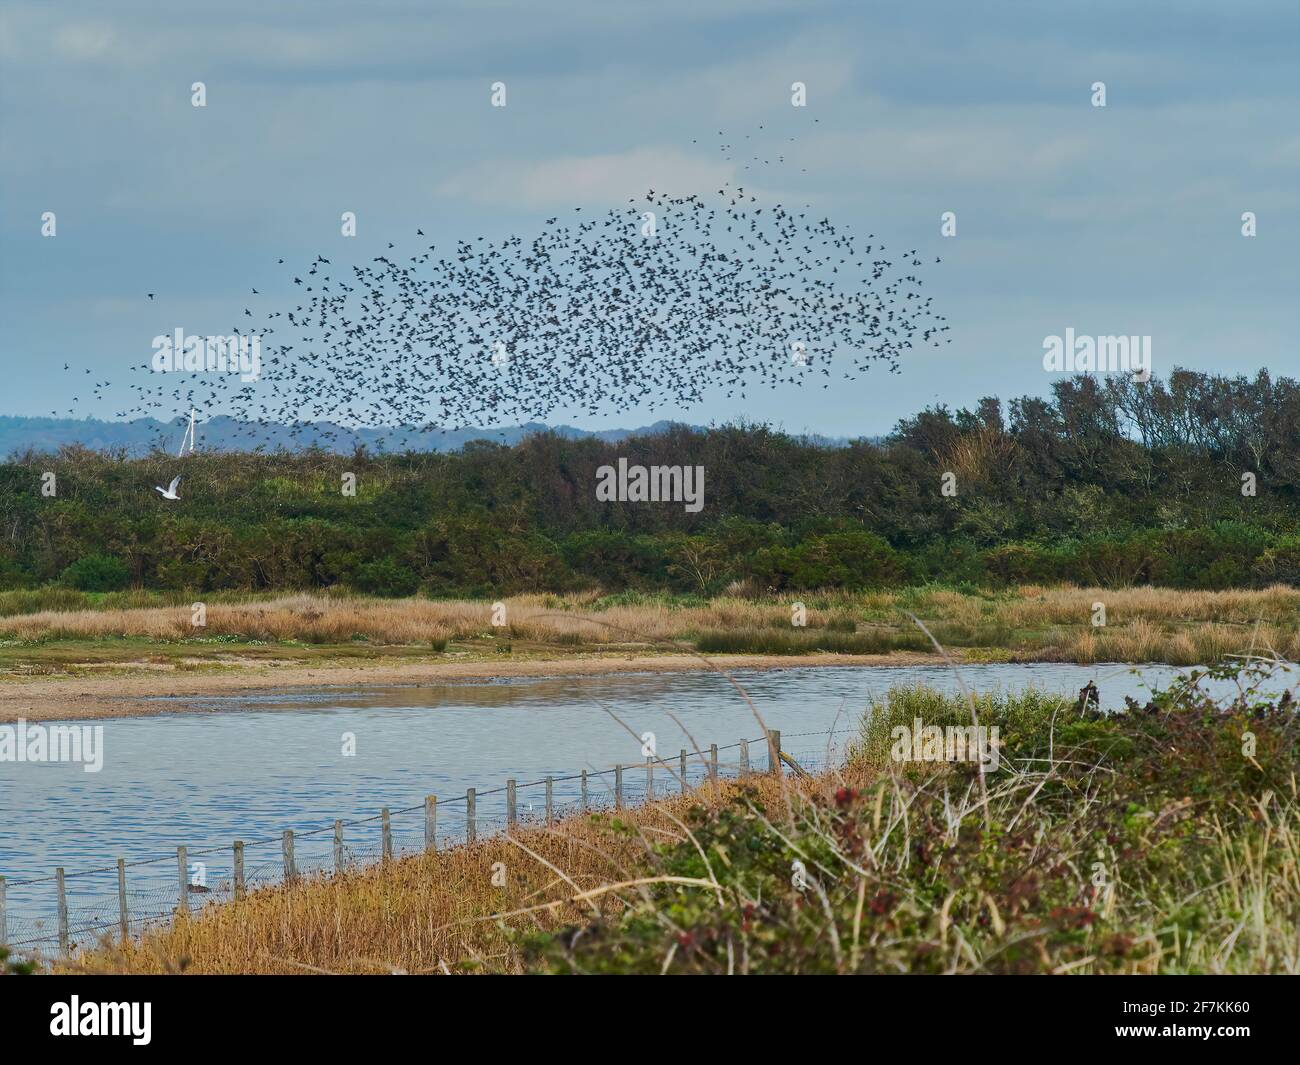 A large flock of distant birds flying in murmuration formation above a tree-bordered lake, a tangle of undergrowth and an eye-leading fence. Stock Photo